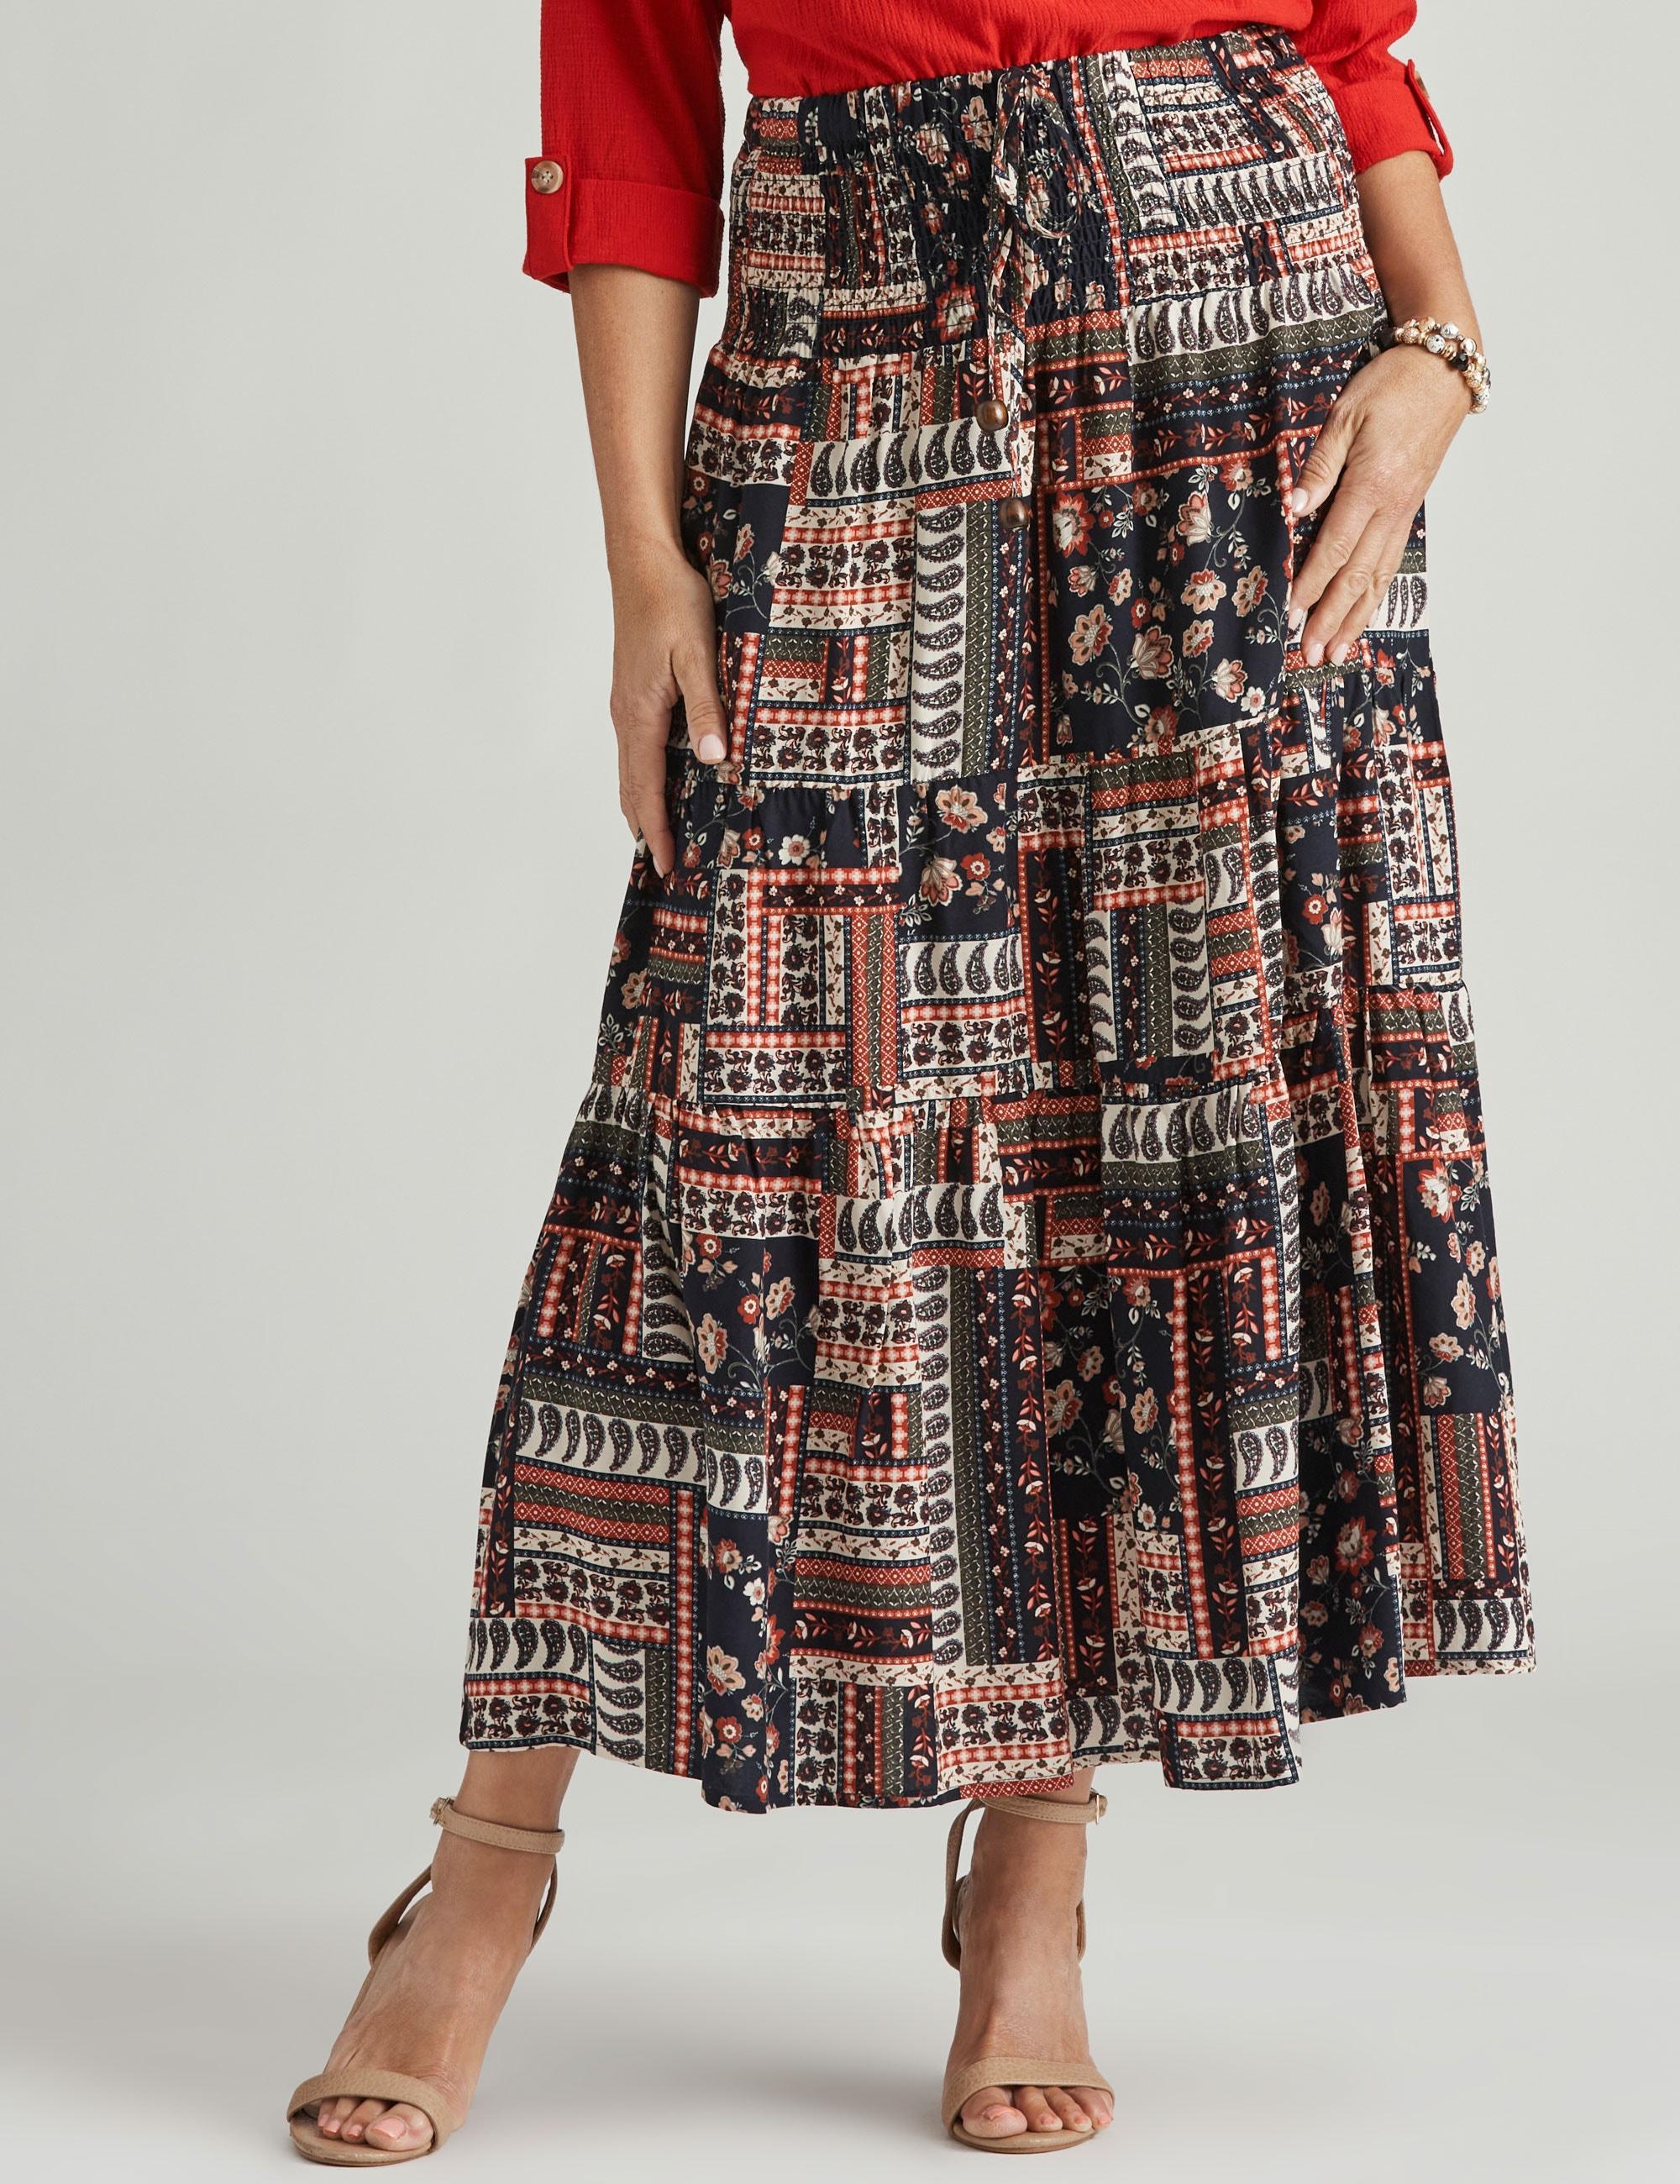 MILLERS - Womens Skirts - Maxi - Summer - Blue - Paisley - A Line - Fashion - Tile Print - Relaxed Fit - Tiered - Long - Office Casual - Work Clothes